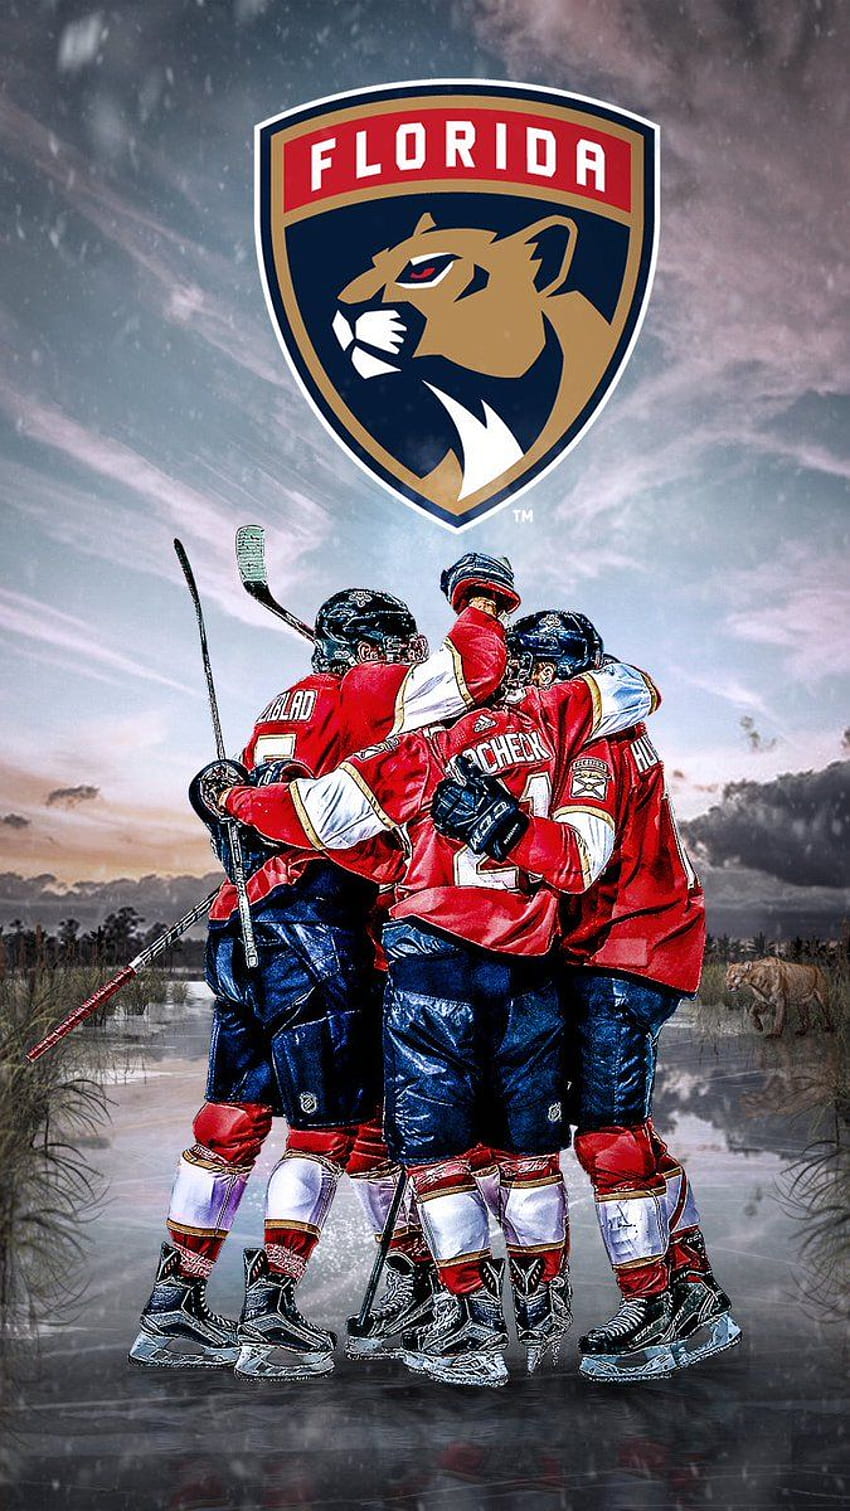 Florida Panthers on X new year new  wallpapers wallpaperwednesday  httpstcog0fQSee3vF  X